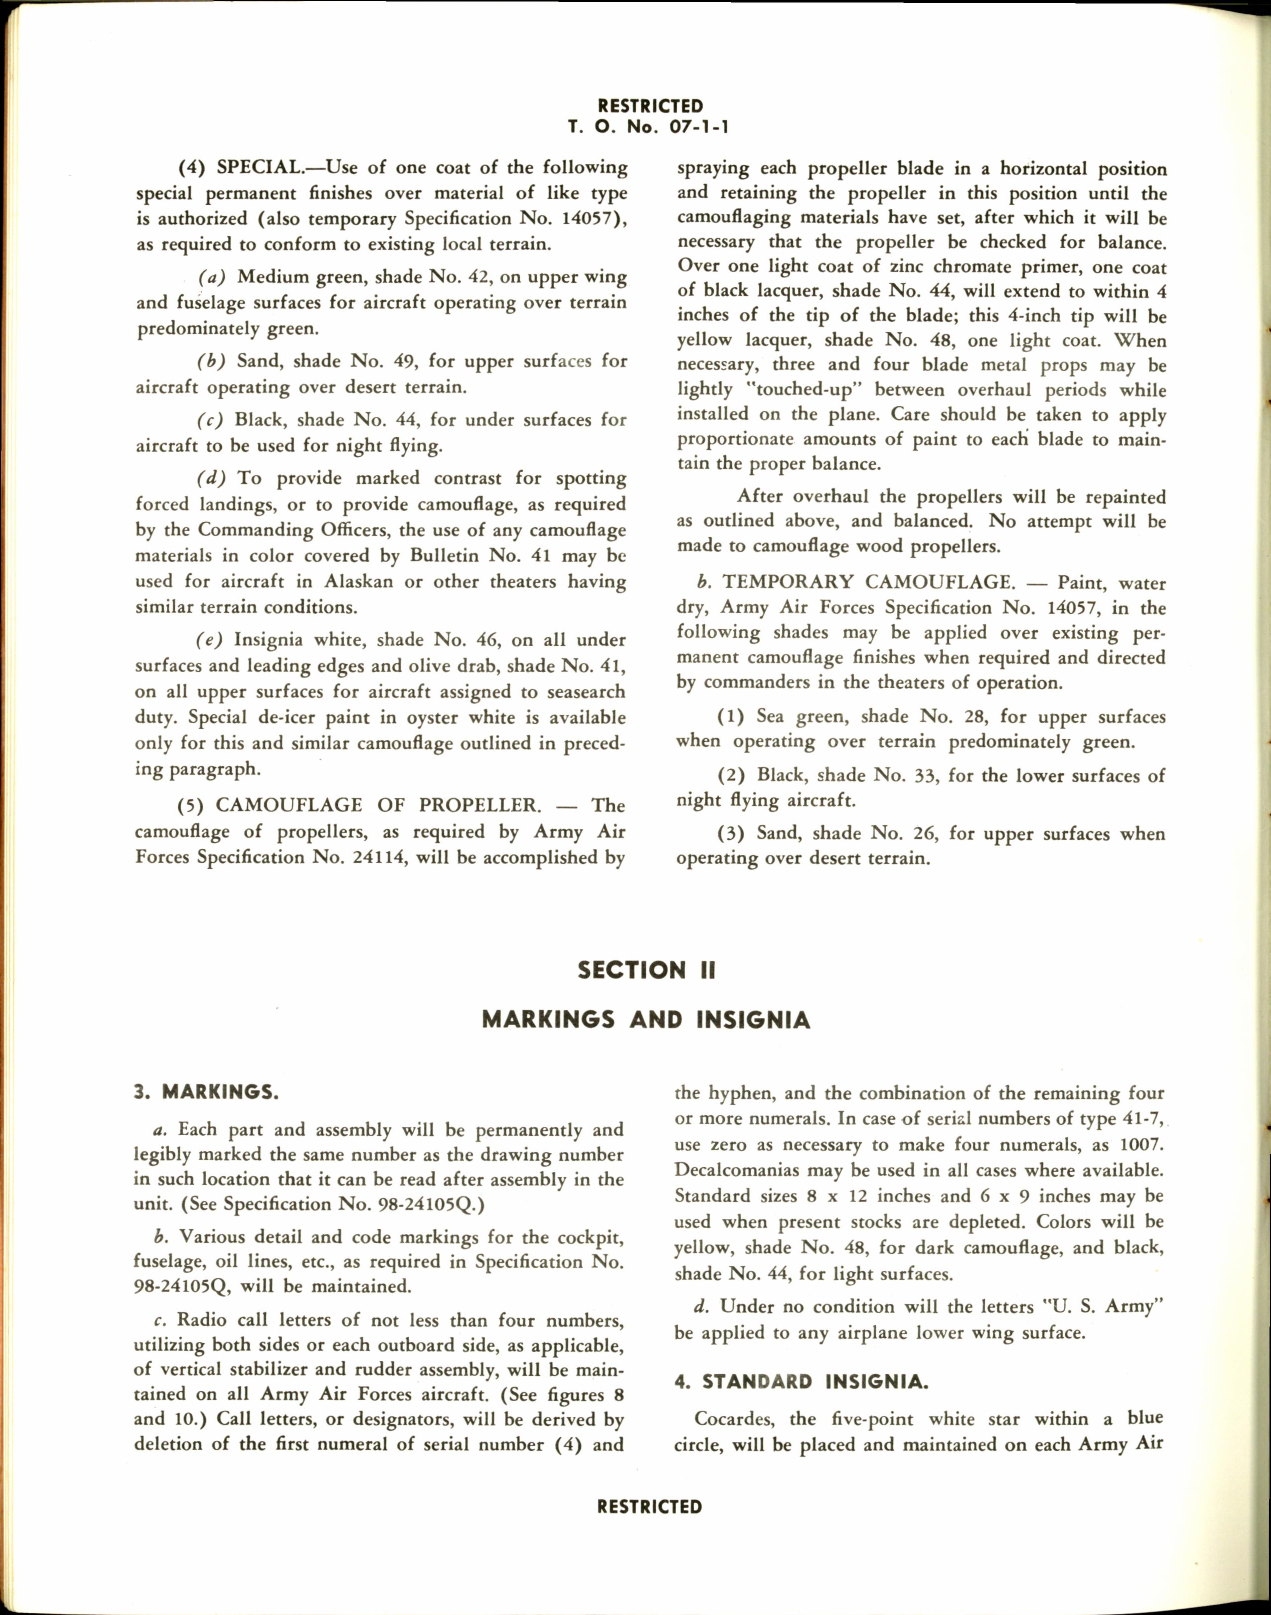 Sample page 10 from AirCorps Library document: United States Camouflage WWII